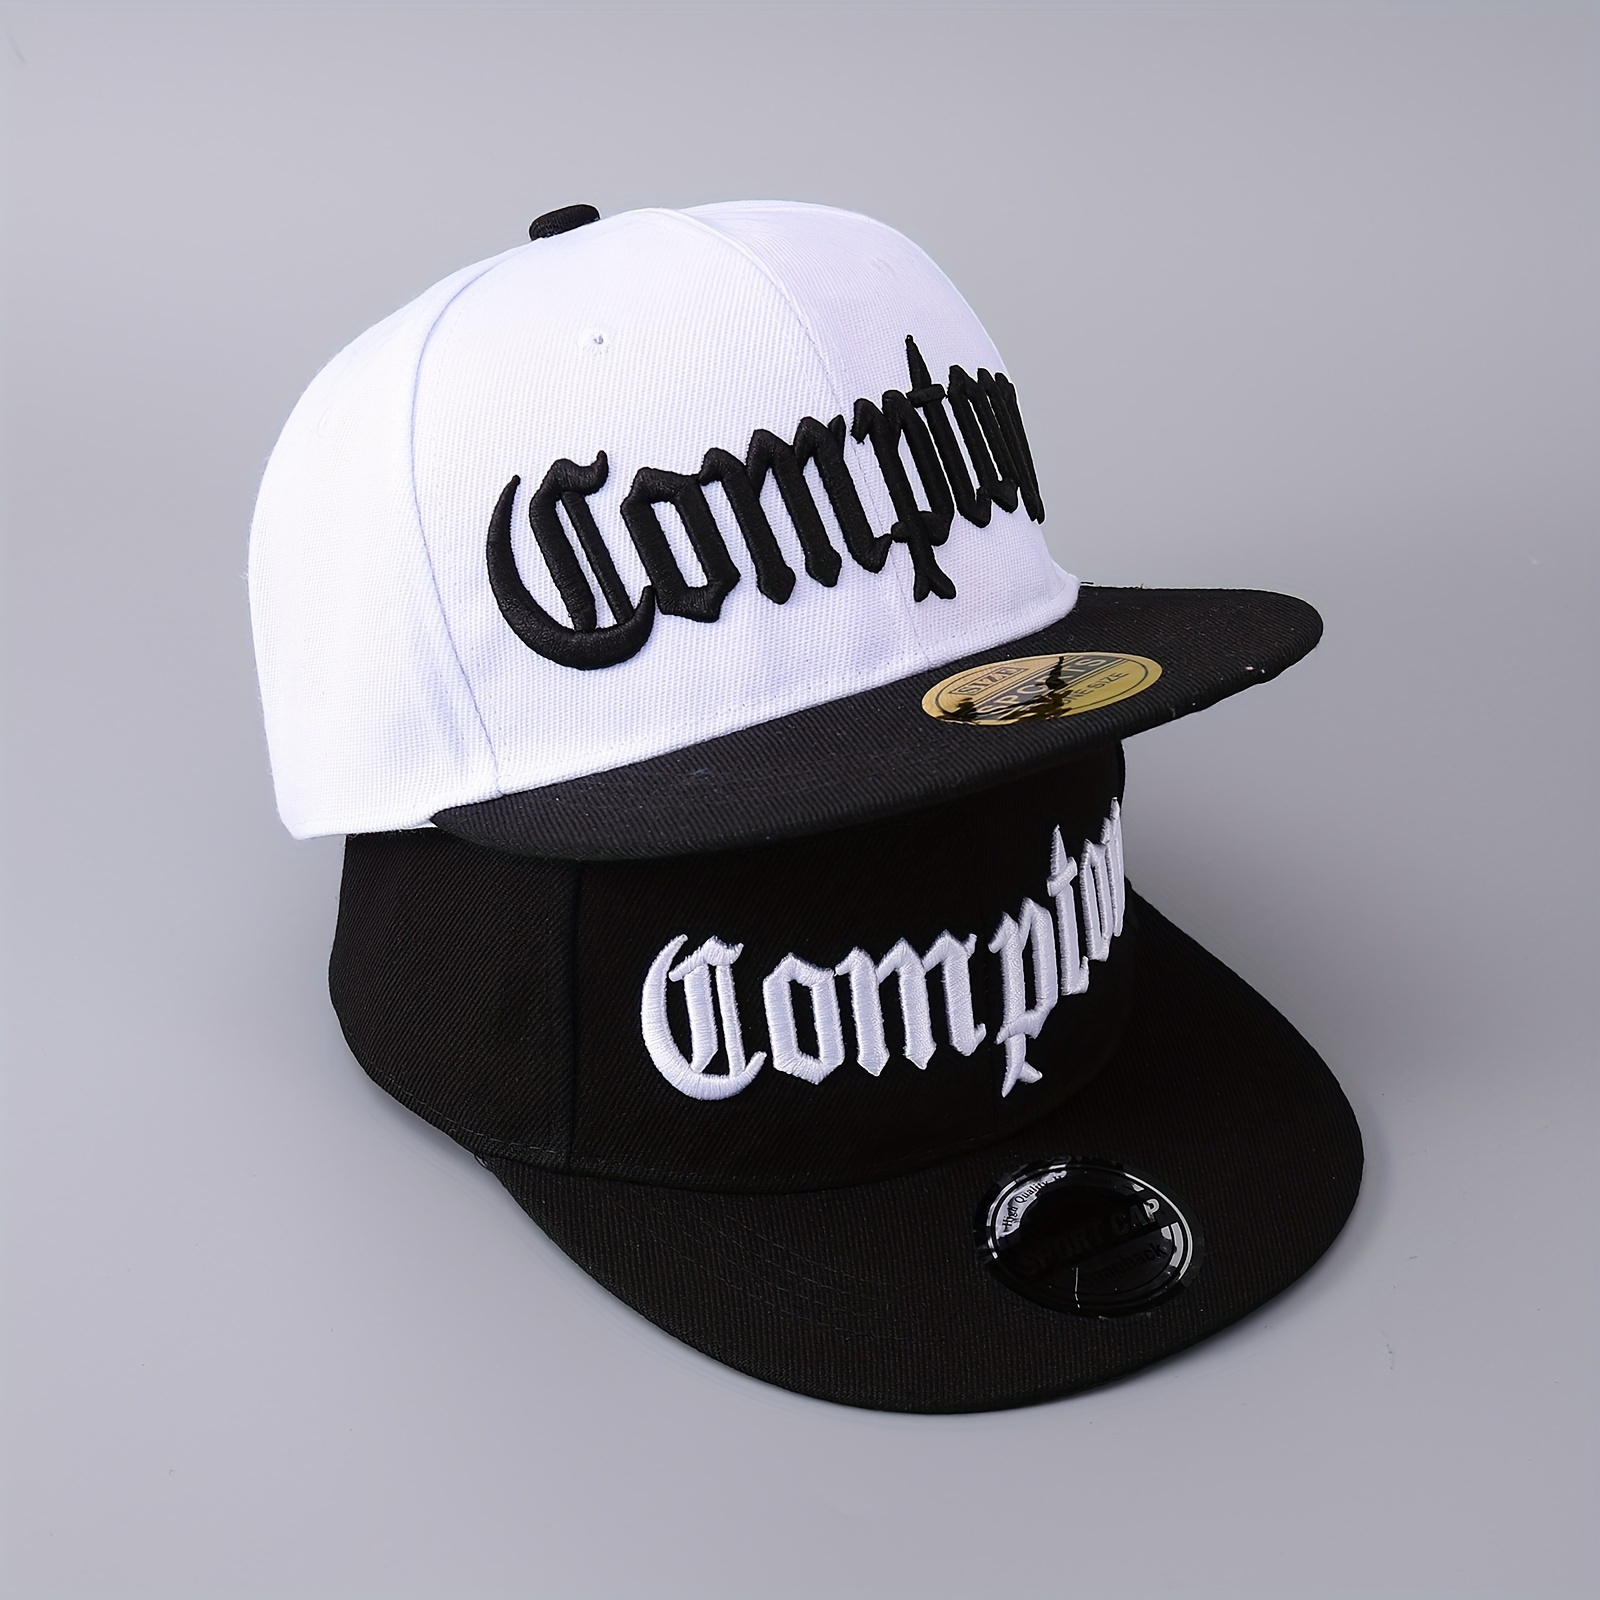 Compton Embroidered Snapback Hats For Men